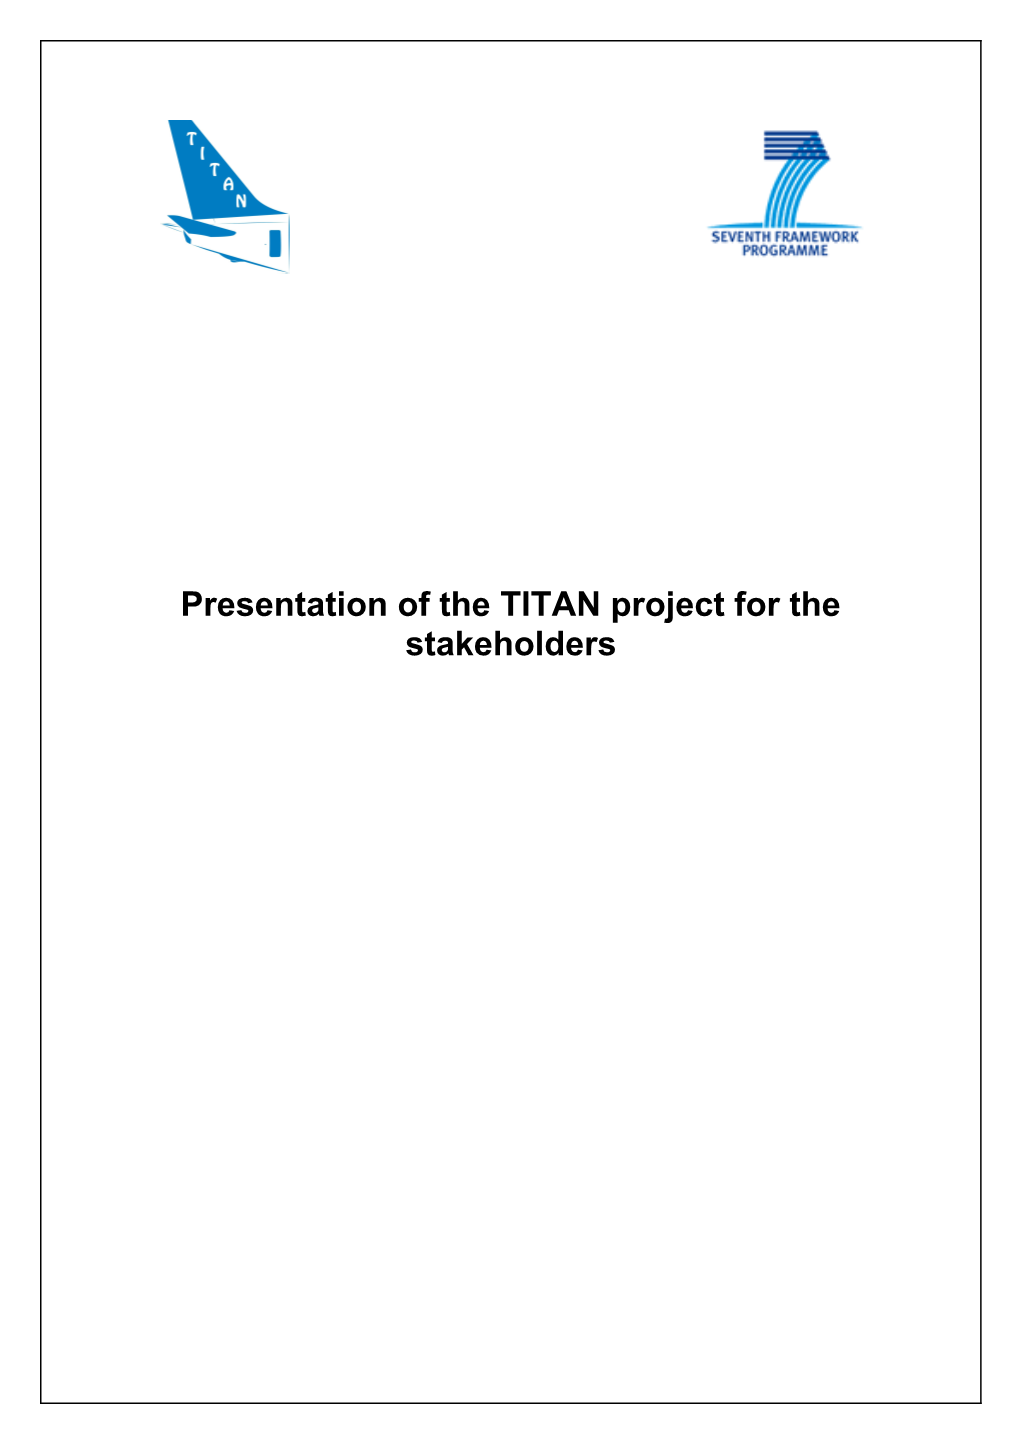 Presentation of the TITAN Project for the Stakeholders